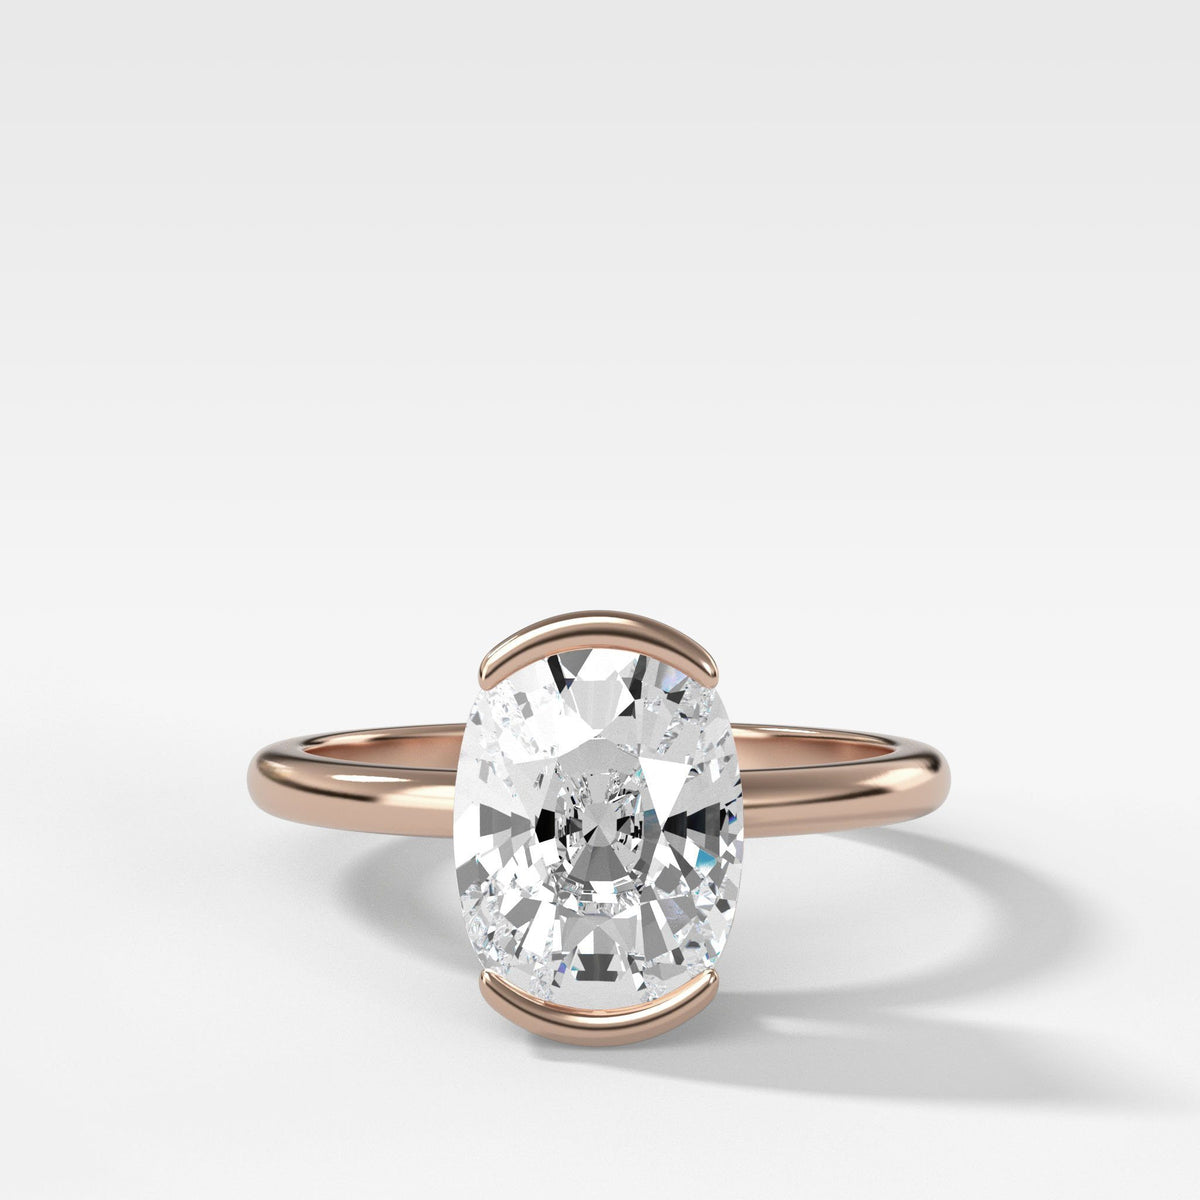 North South Half Bezel Solitaire Engagement Ring With Elongated Cushion Cut by Good Stone in Rose Gold